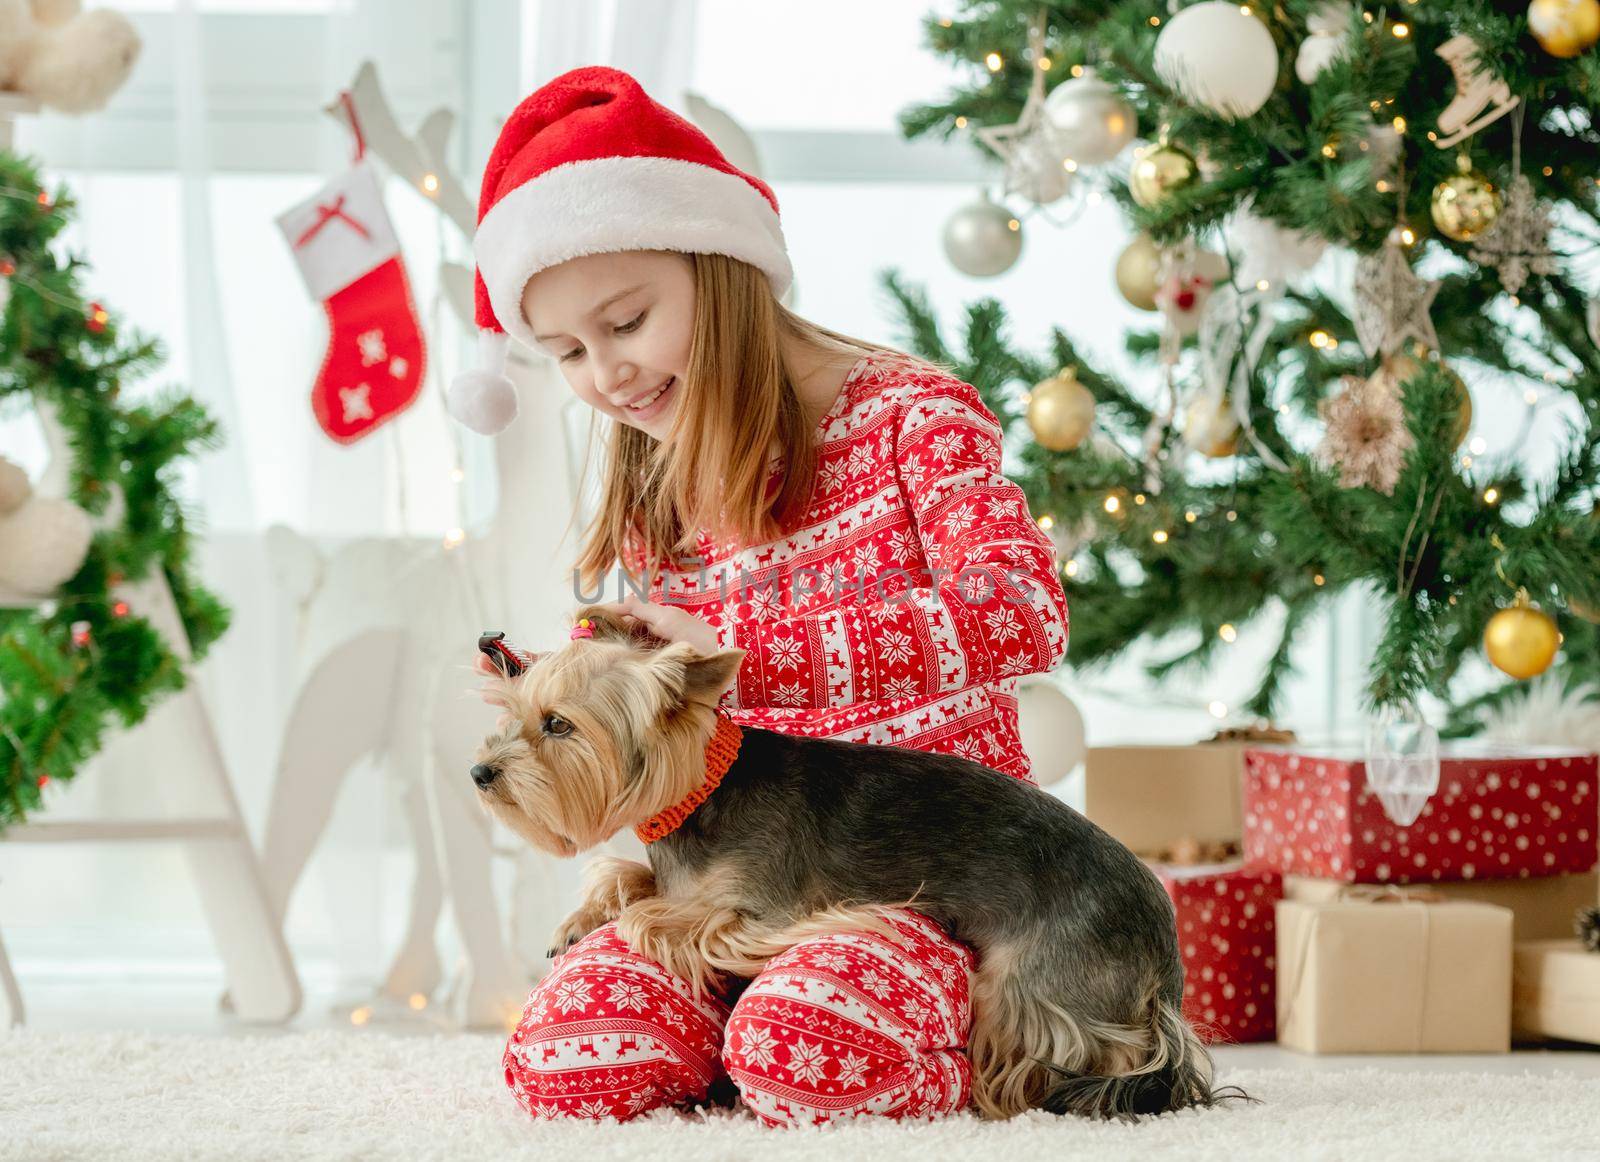 Child girl combing the hair dog sitting on floor with Christmas tree on background. Kid and pet doggy enjoying New Year time and decoration at home